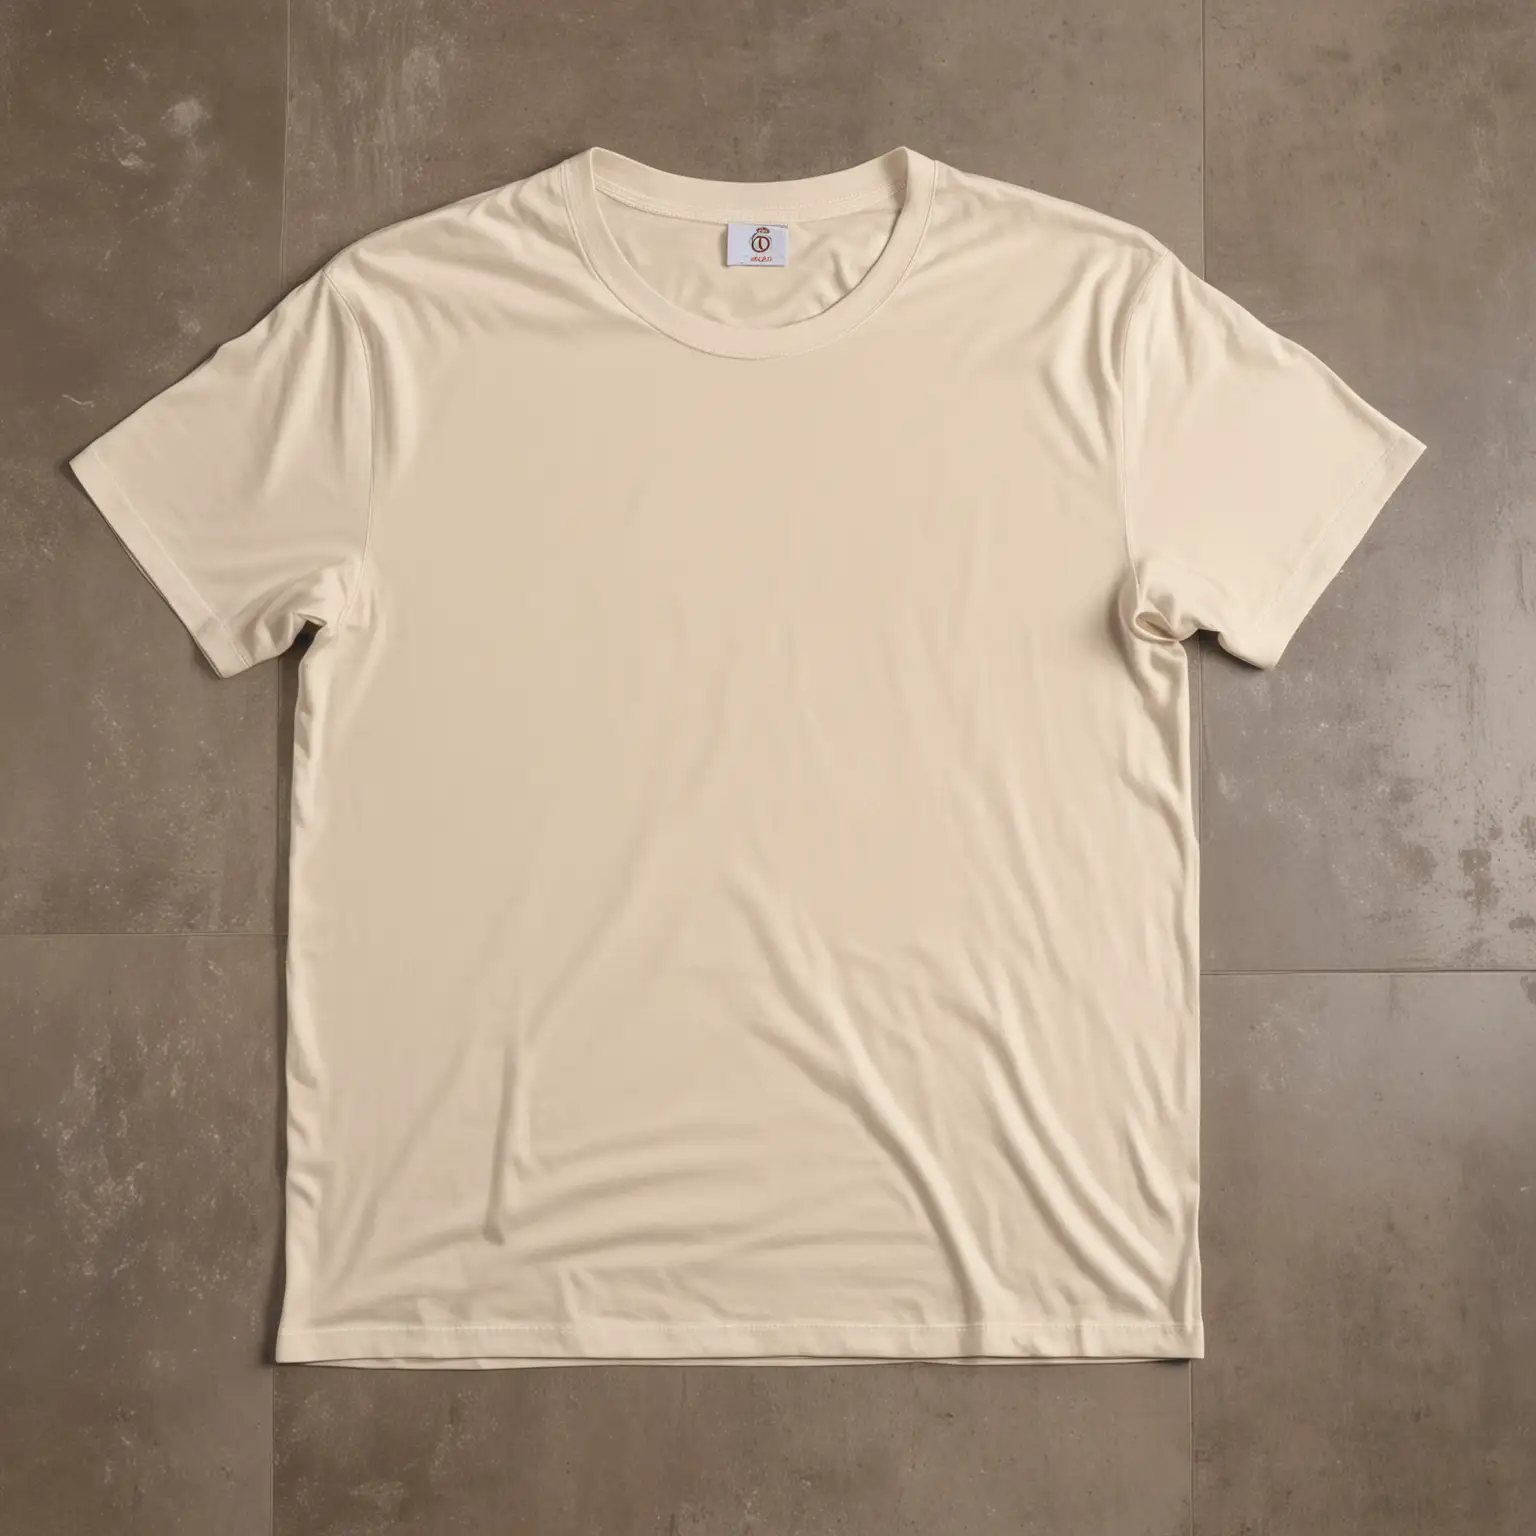 HYPER REALISTIC ironed simmetrical proportional 100% cotton bella canvas 3001 natural tshirt no wrinkles, lied on floor seen from above with solid contrasting background floor